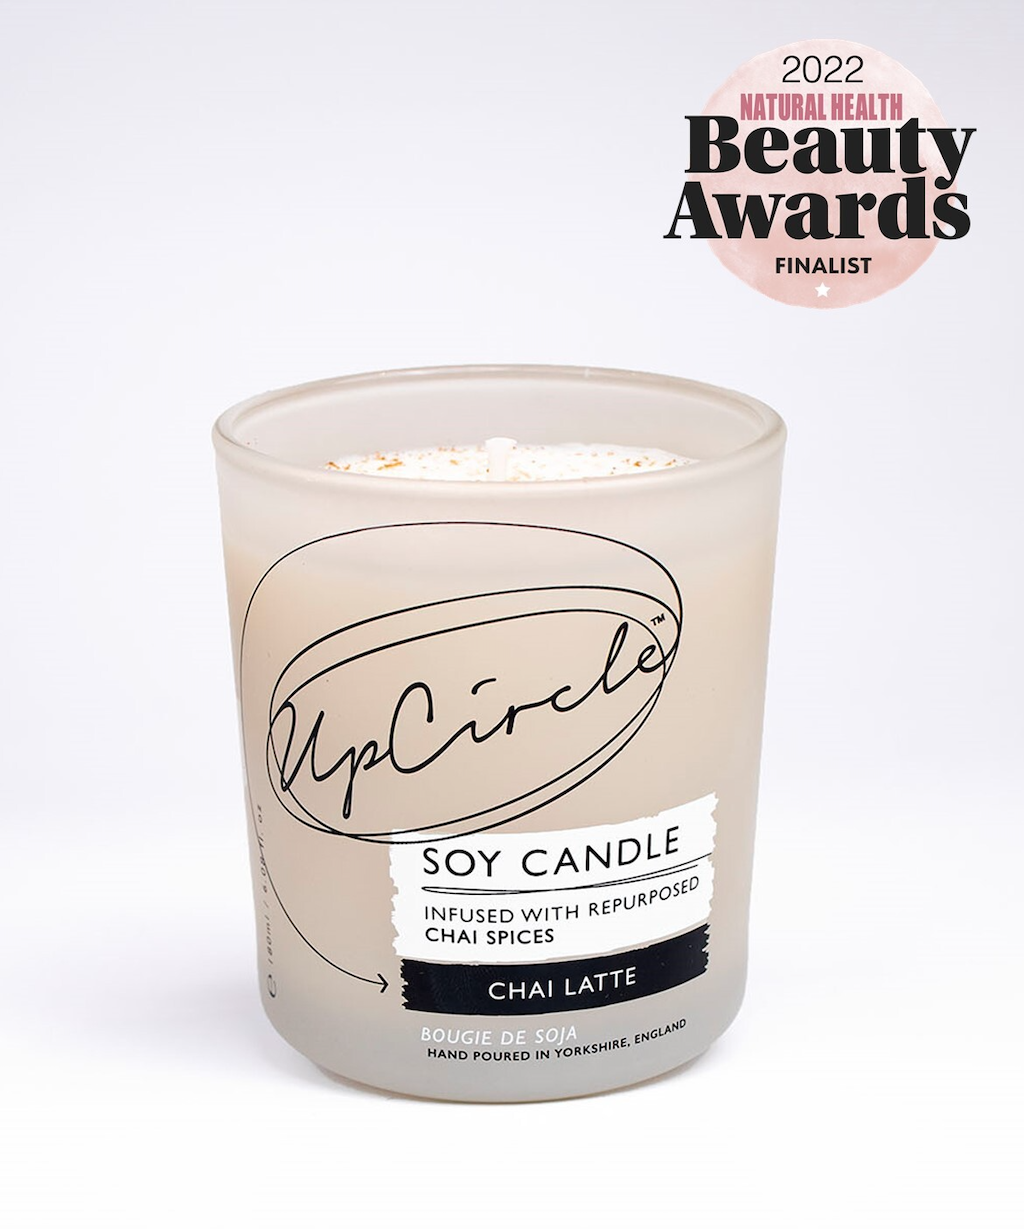 Upcircle Beauty Chai Latte Soy Candle. Award Winning candles. The candle is shown with the 2022 Women's Health Beauty Awards finalist logo.